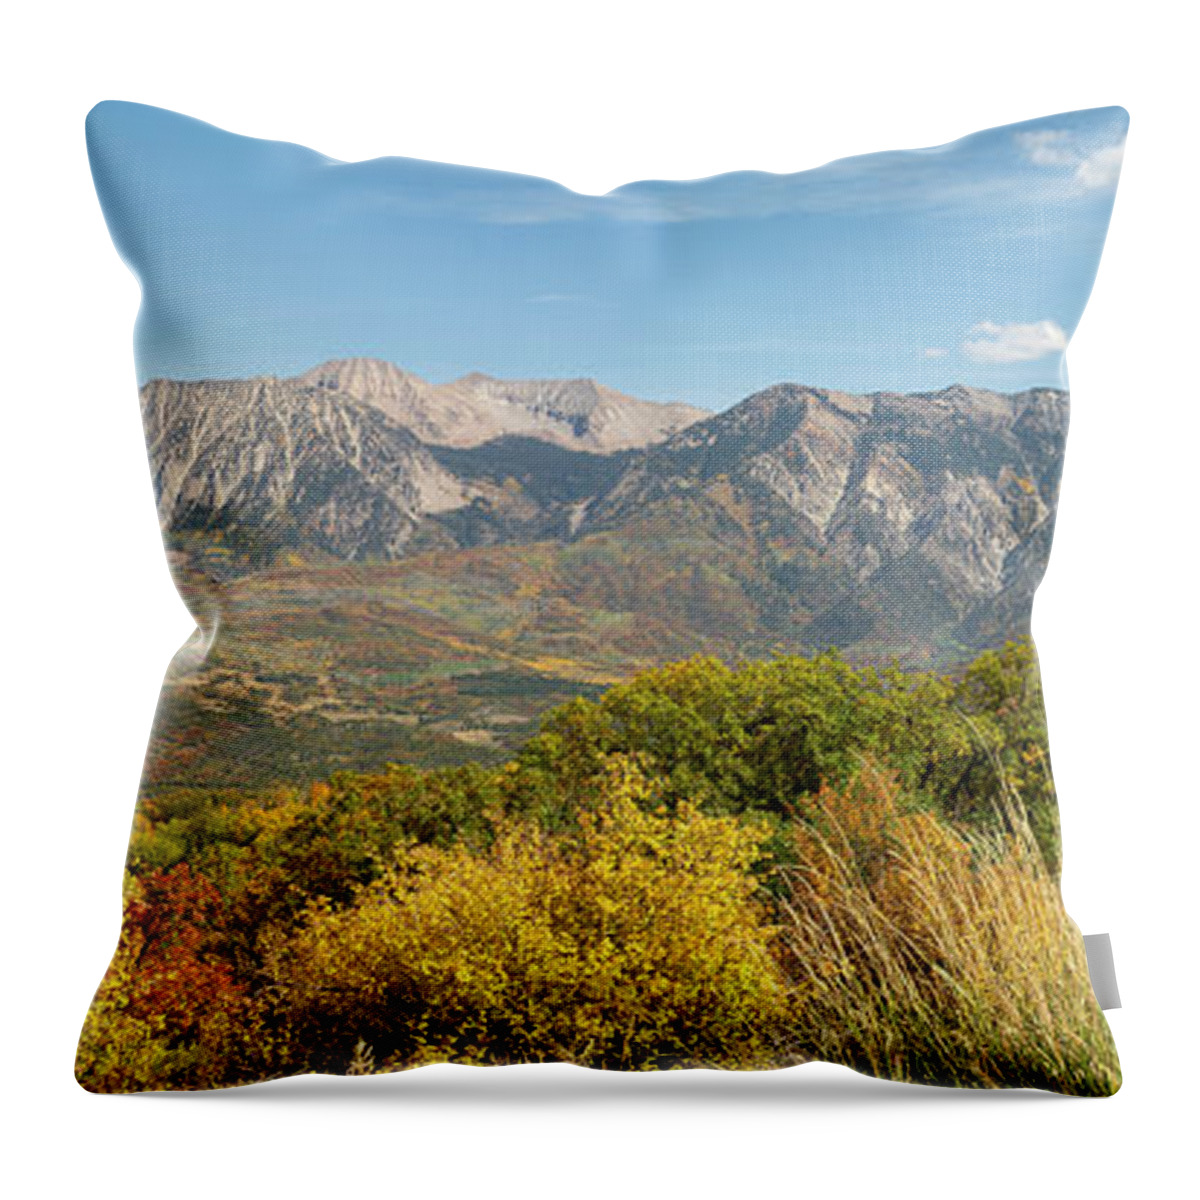 Ragged Peaks Throw Pillow featuring the photograph Ragged Peaks Panorama by Aaron Spong